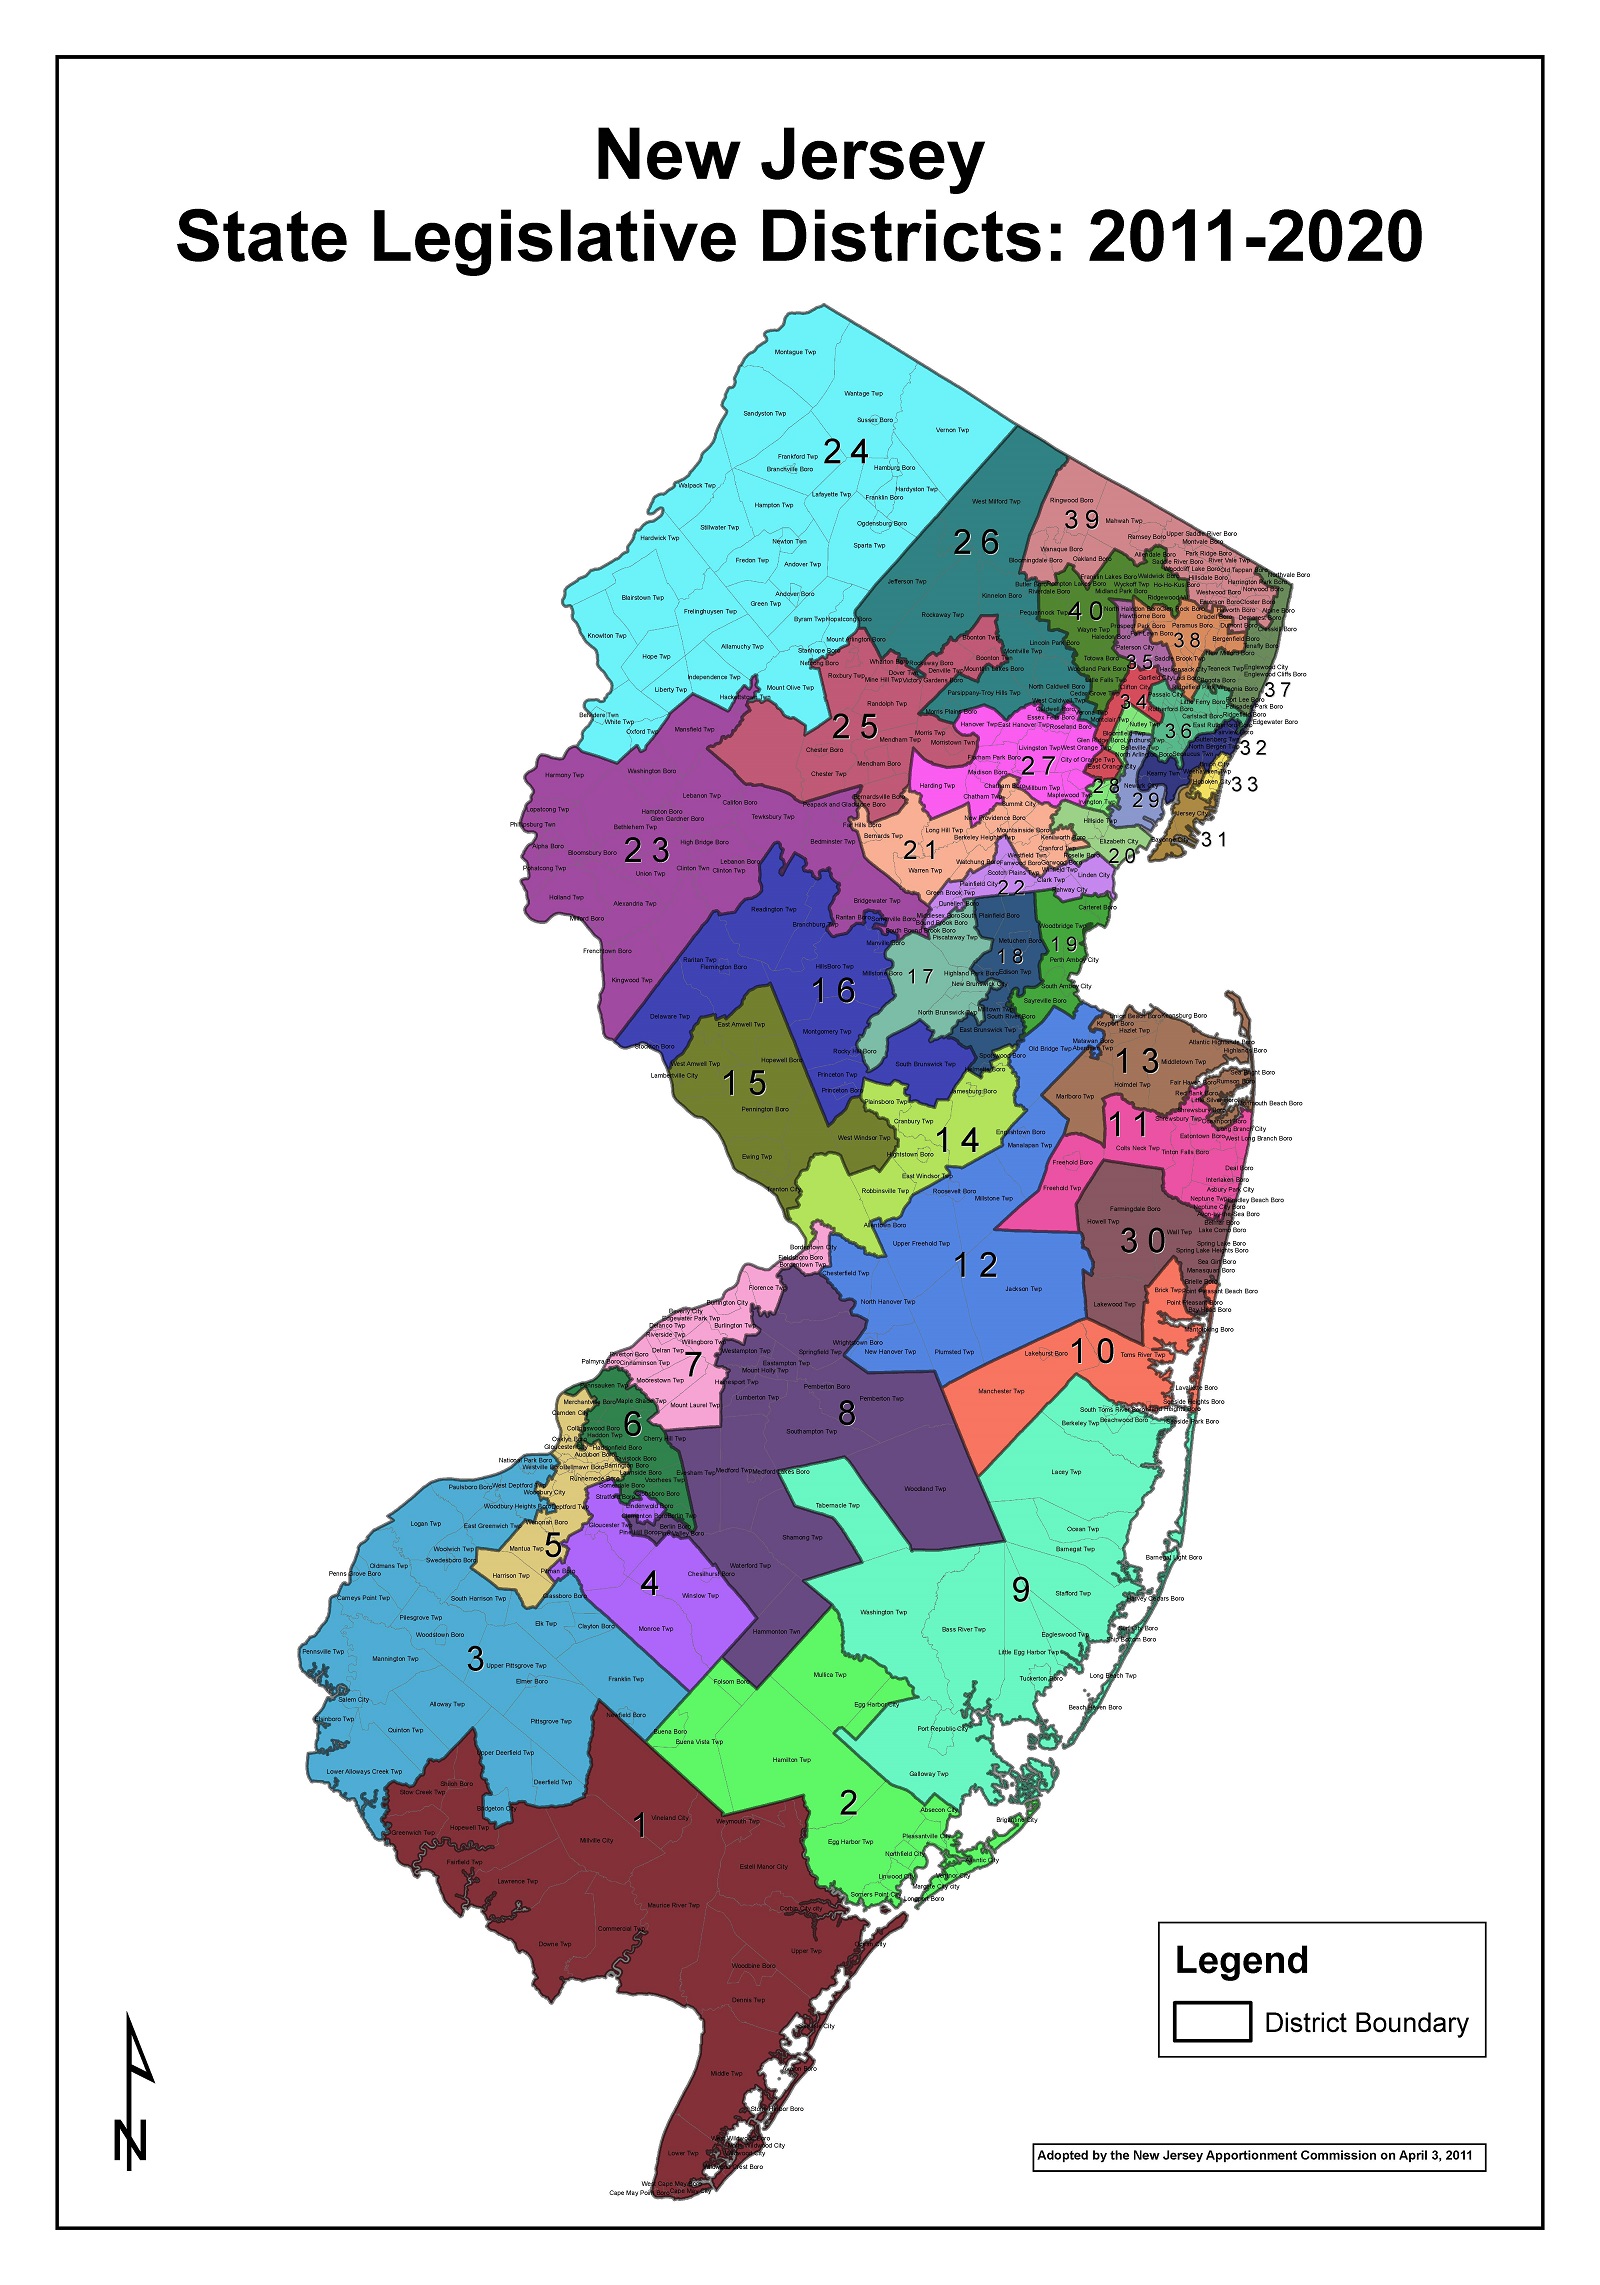 State redistricting information for New Jersey